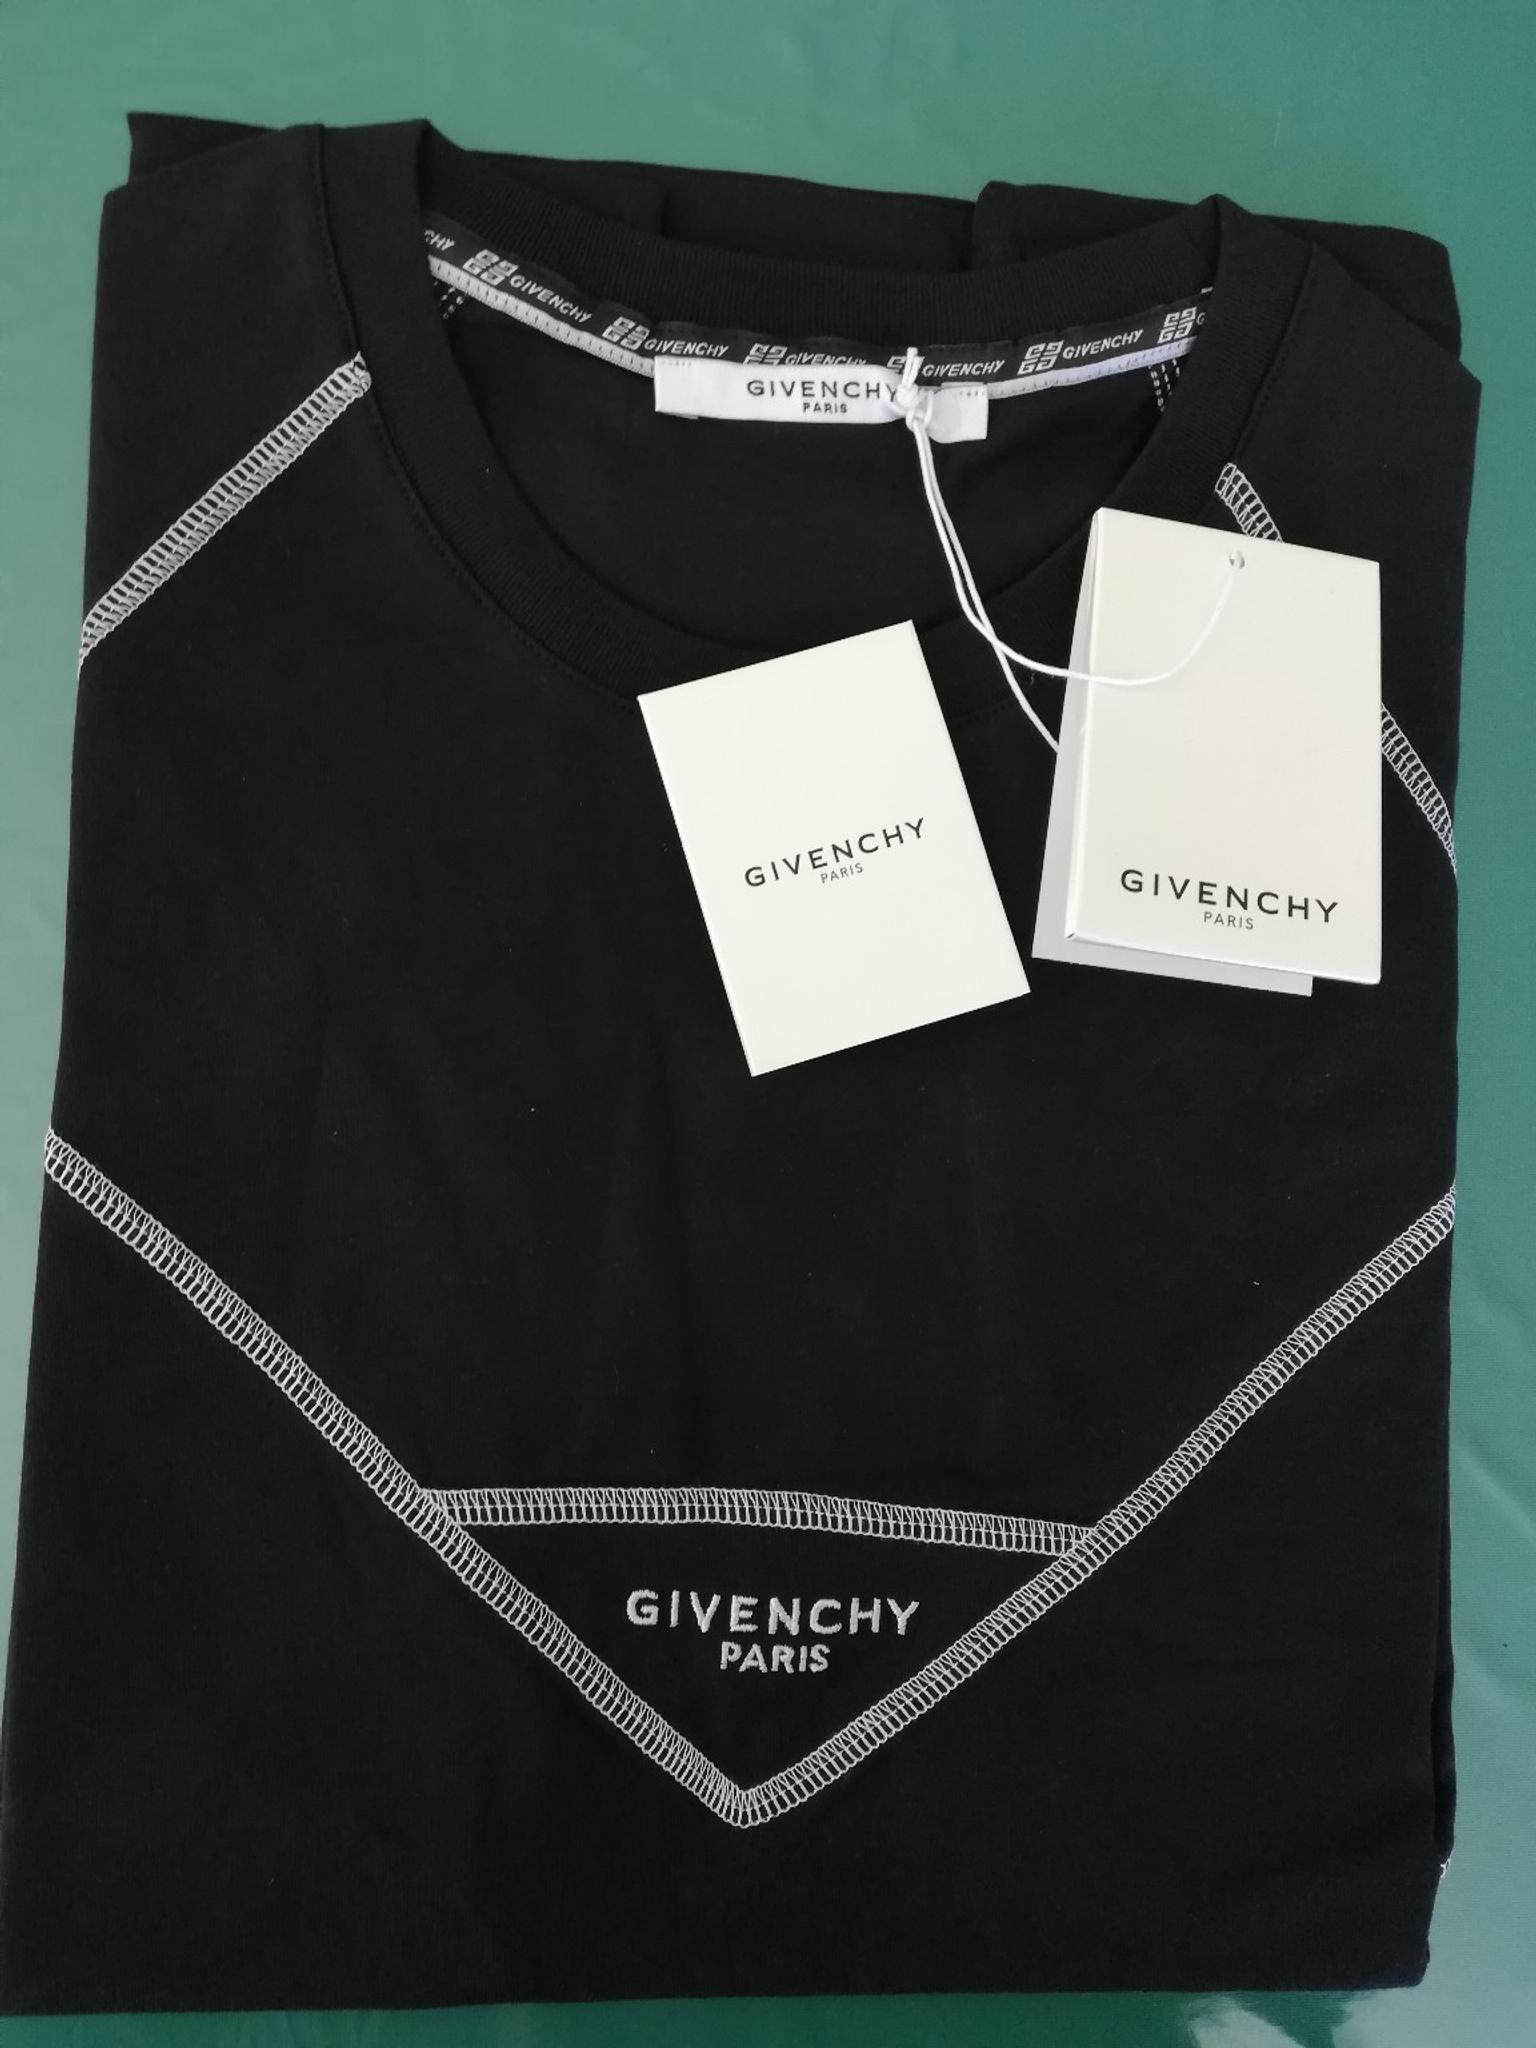 T-shirt GIVENCHY uomo con logo frontale in Itri for €139.00 for 